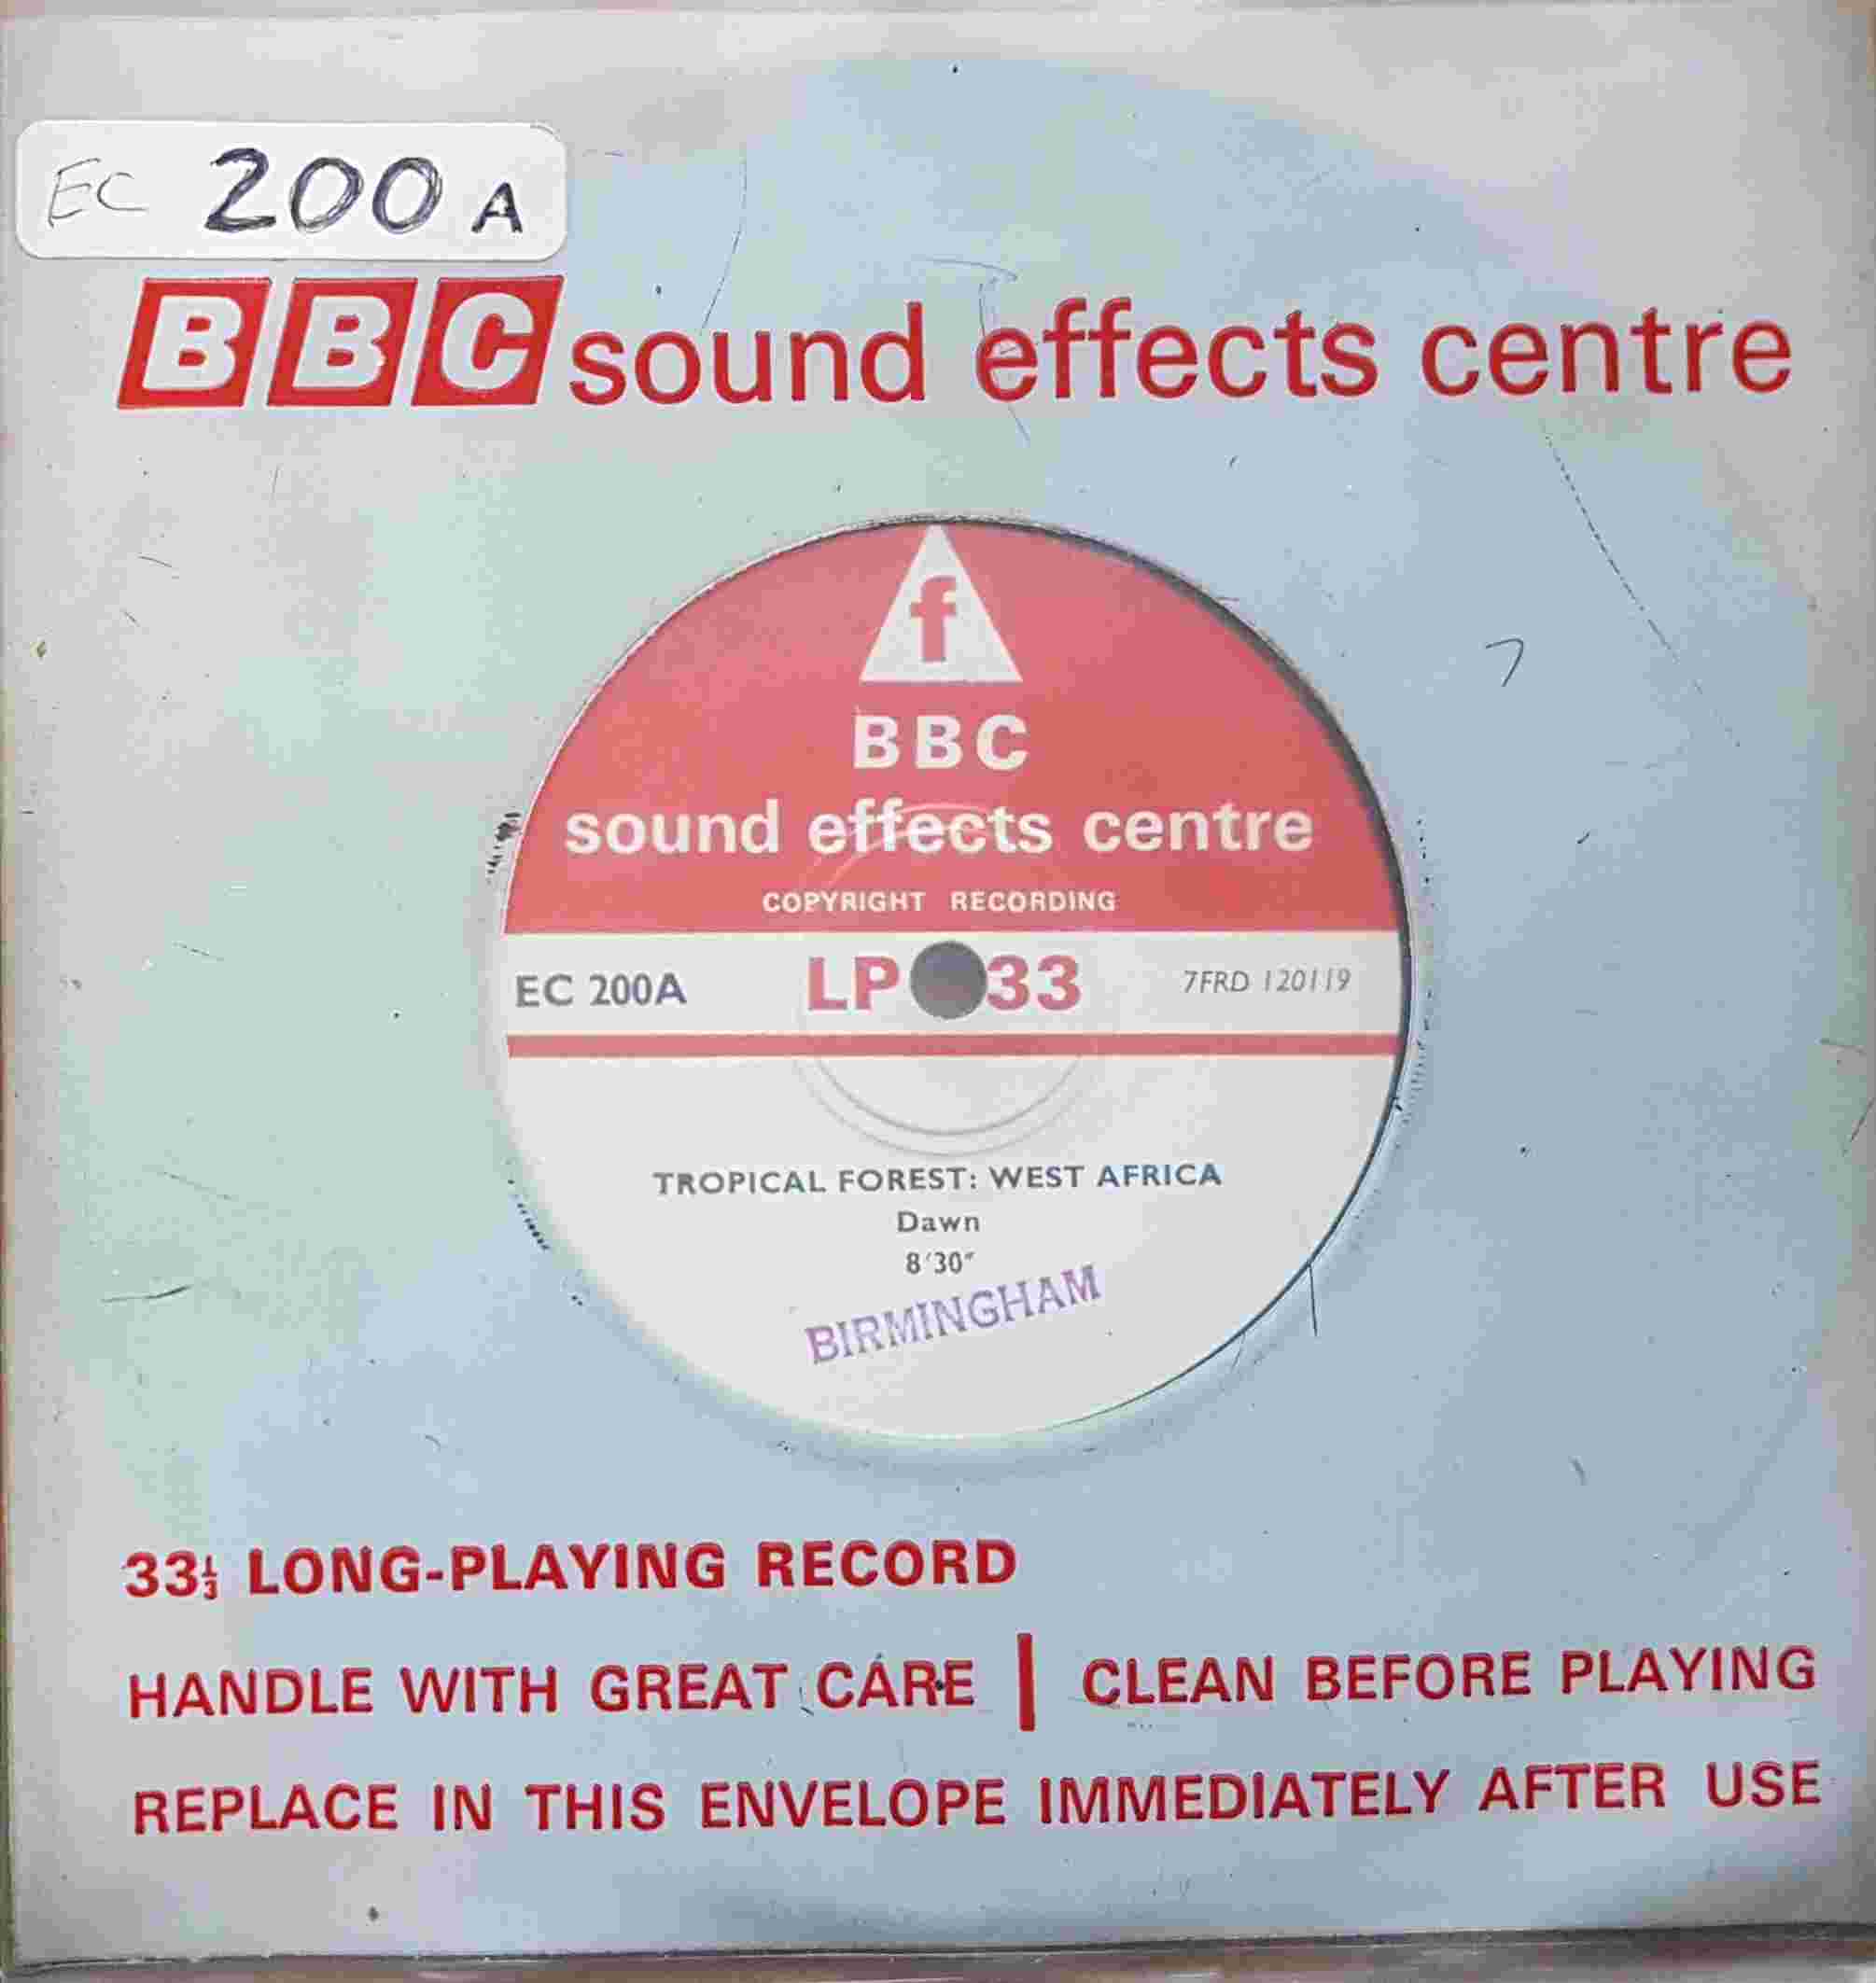 Picture of EC 200A Tropical forest: West Africa by artist Not registered from the BBC records and Tapes library